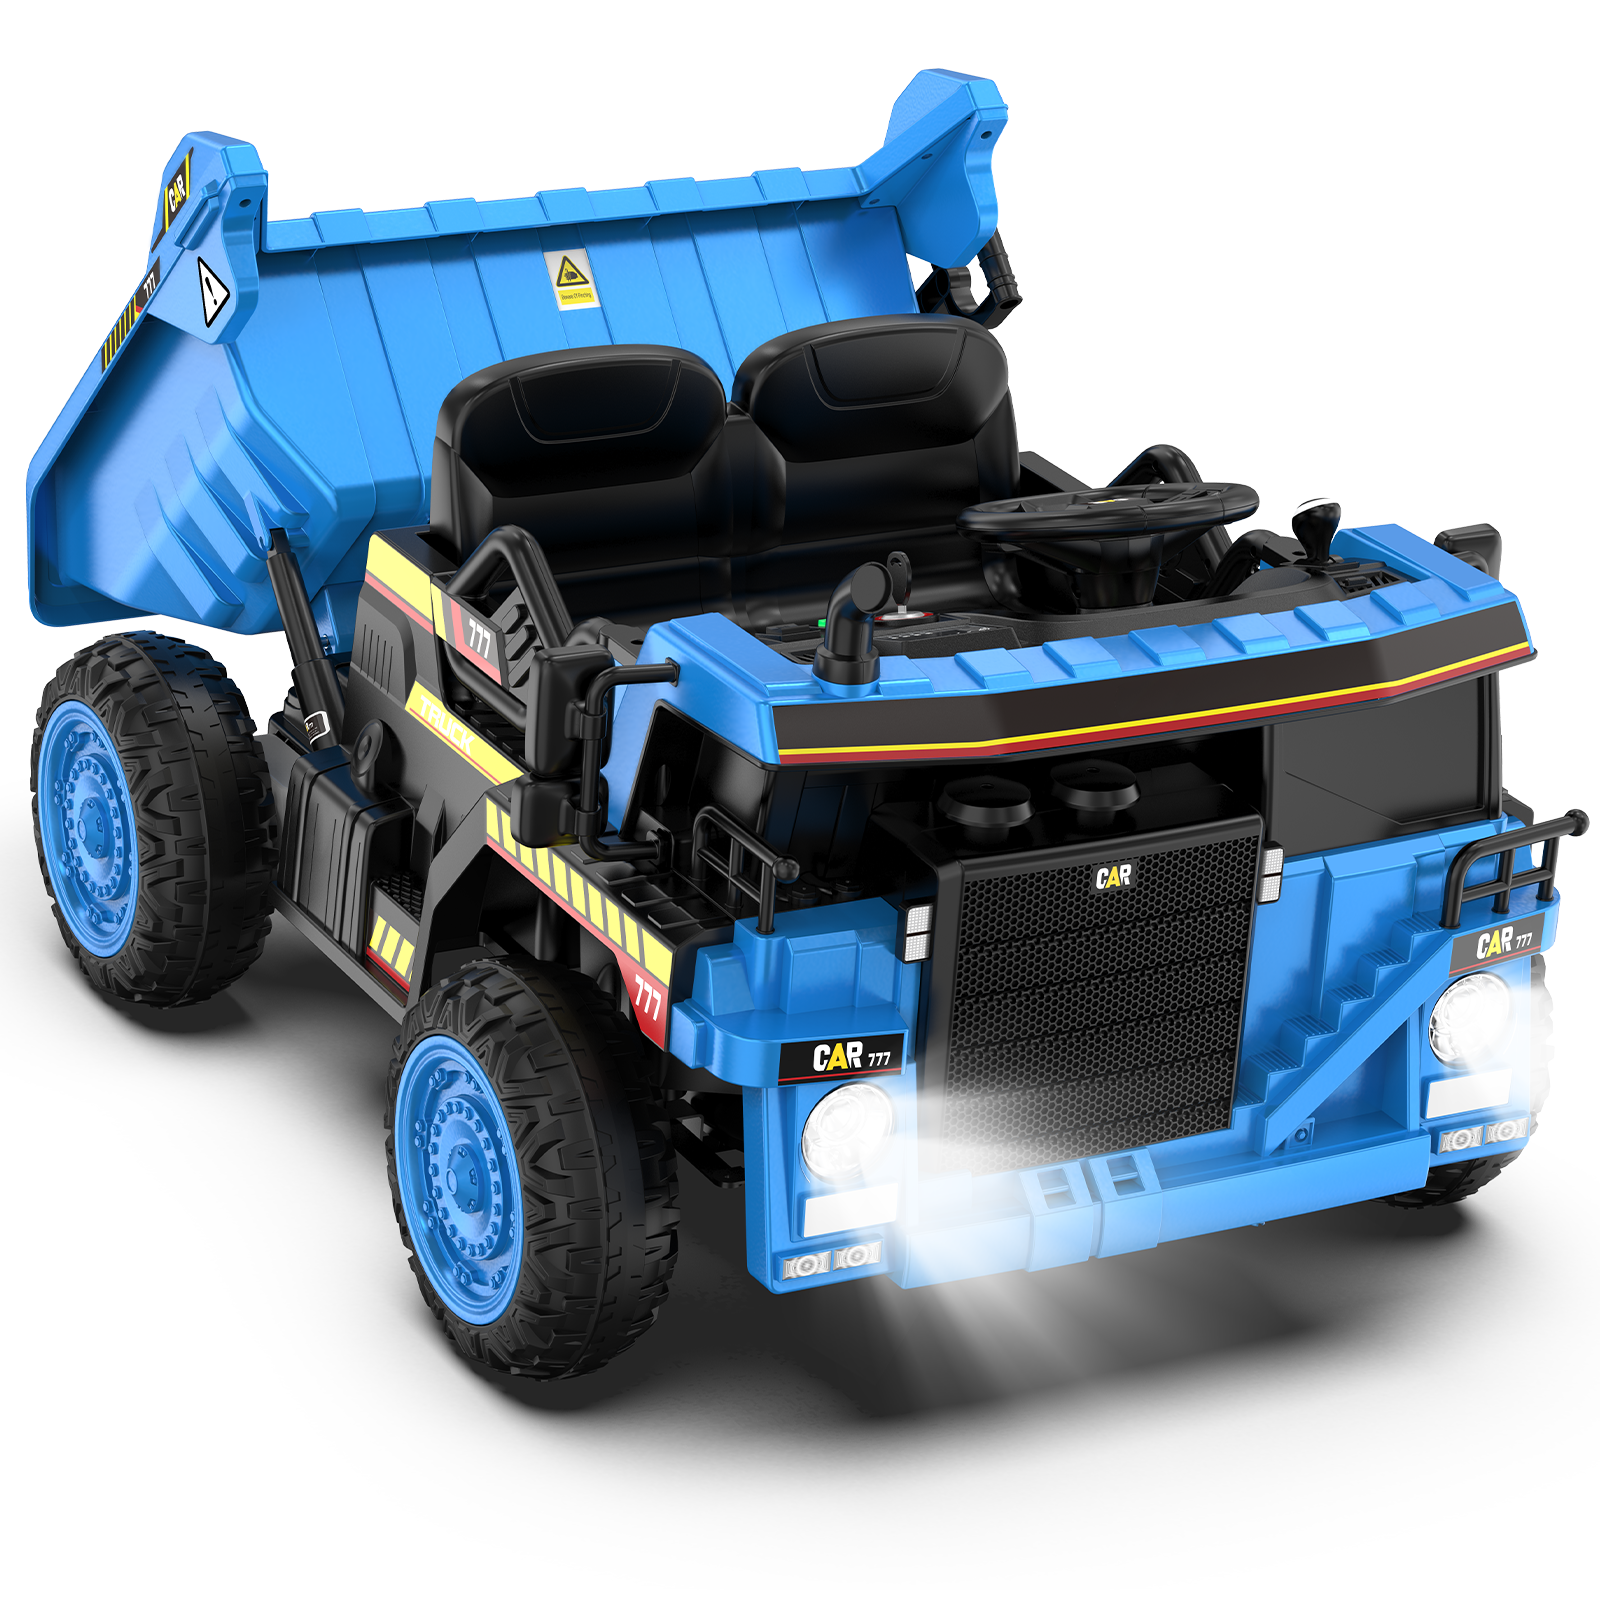 TOKTOO 12V Powered Ride on Dump Truck, Kid Electric Car with Remote Control, Music Player, Electric Dump Bed-Blue - image 1 of 13